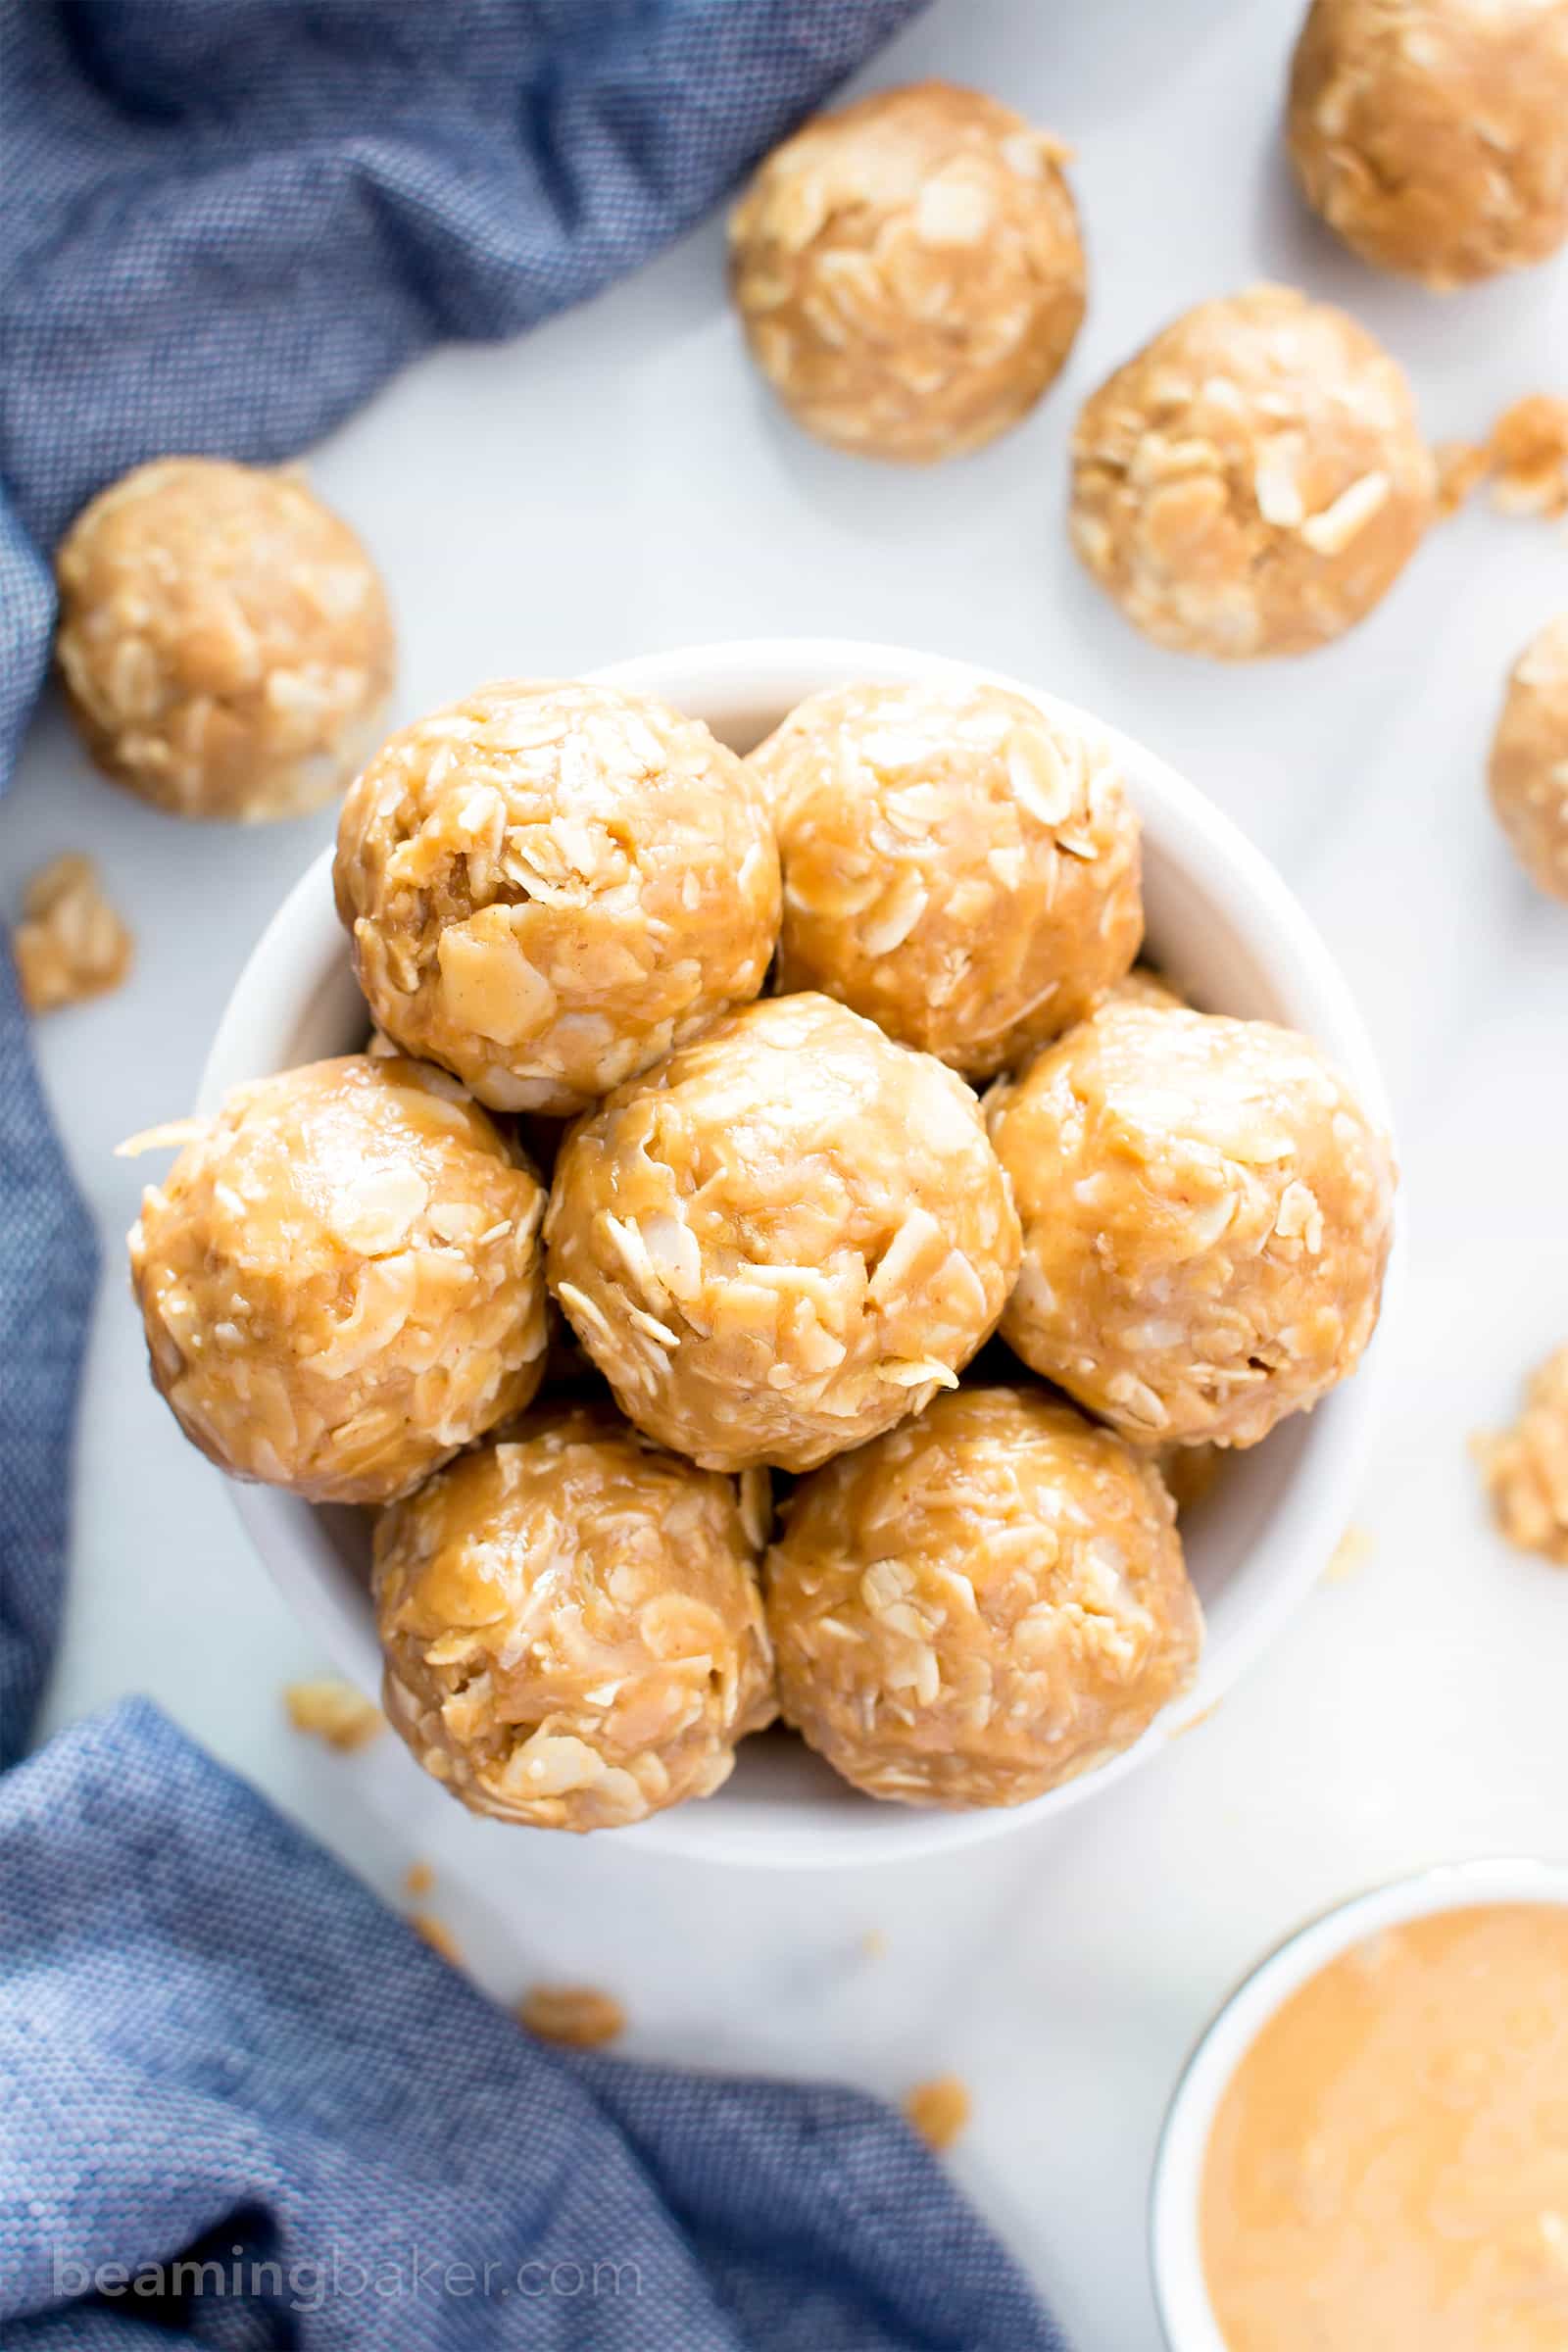 4 Ingredient No Bake Peanut Butter Coconut Energy Bites (V, GF): a quick ‘n easy One Bowl recipe for tasty protein-packed energy bites bursting with peanut butter and coconut! #Vegan #ProteinRich #GlutenFree #DairyFree #WholeGrain | BeamingBaker.com